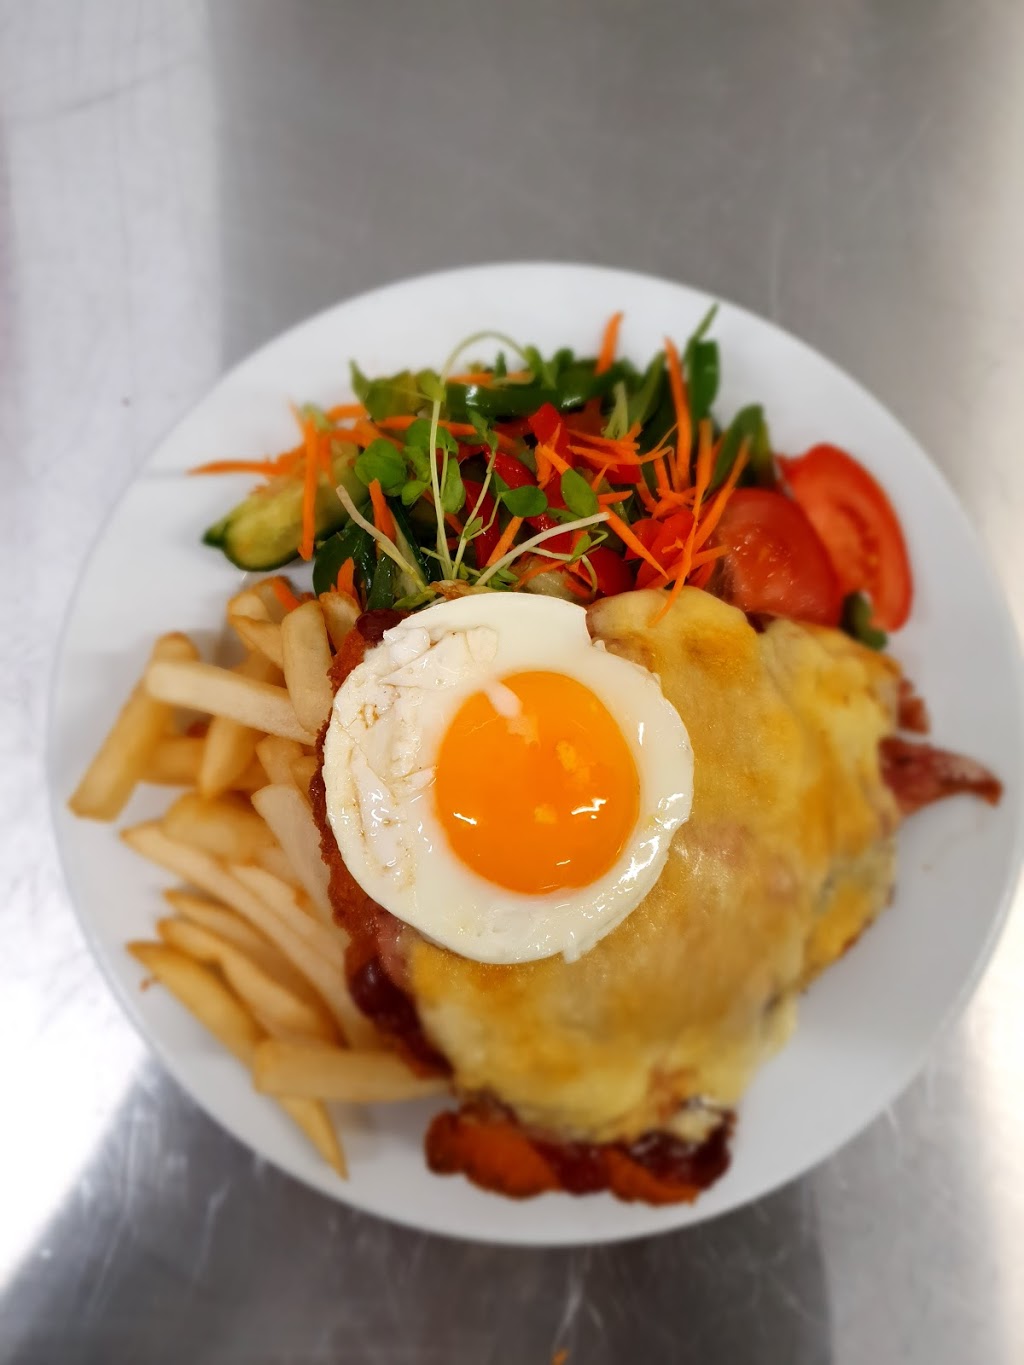 Willow tree bowling club | restaurant | 84 Recreation Rd, Willow Tree NSW 2339, Australia | 0476226454 OR +61 476 226 454